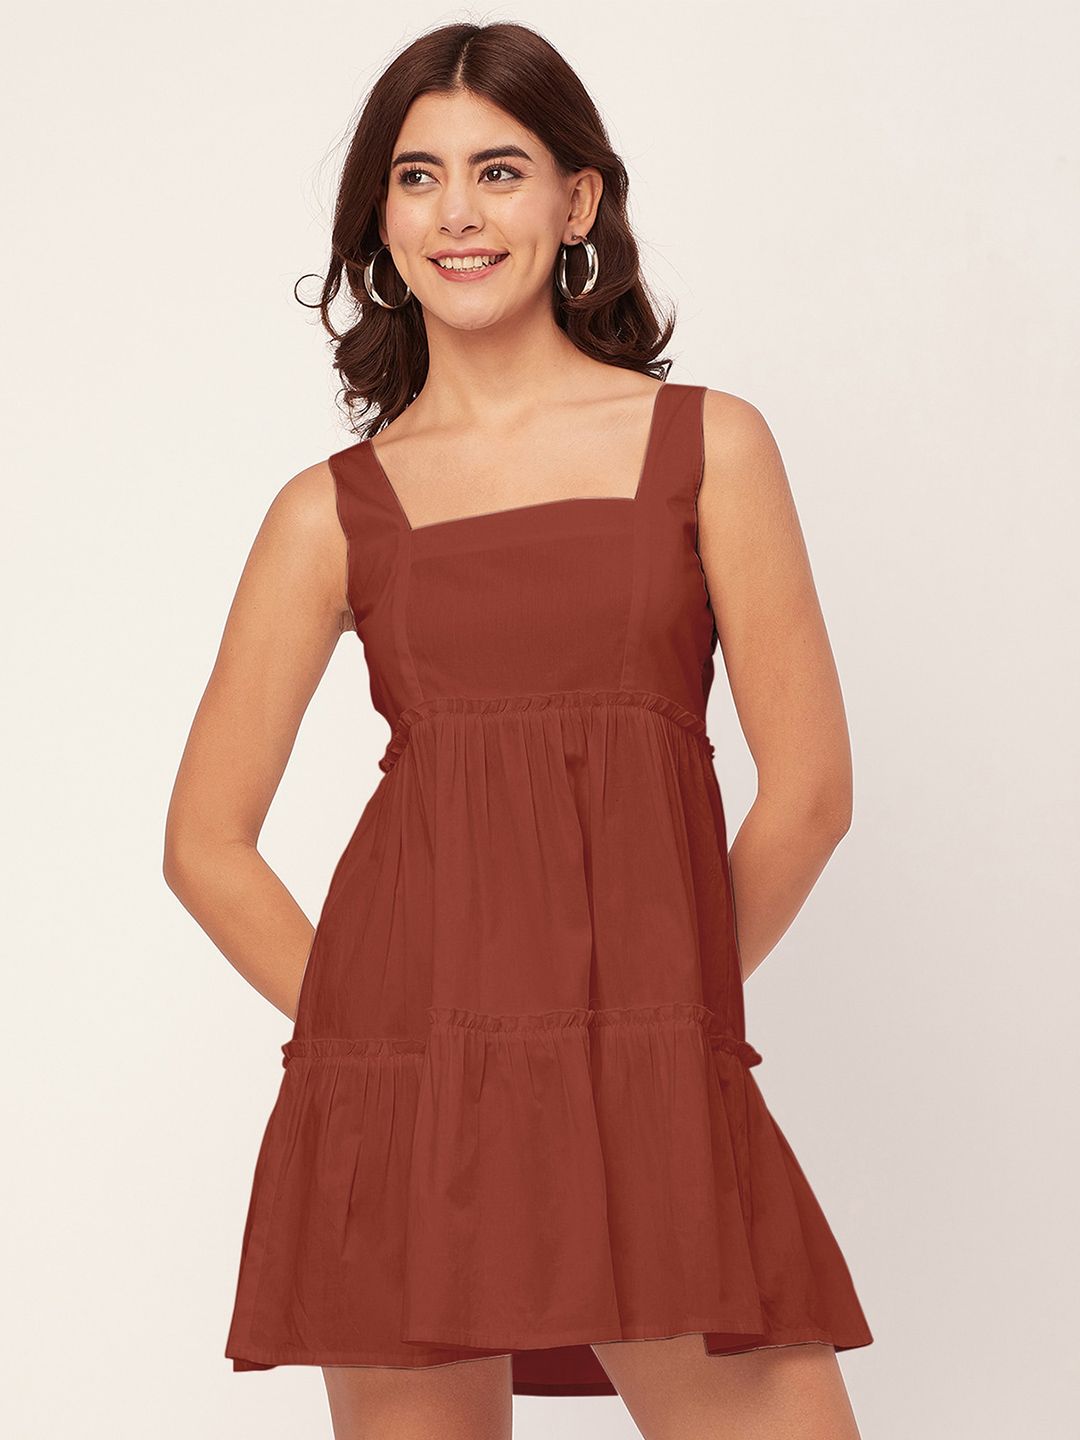 Moomaya Square Neck Sleeveless Cotton Tiered Fit & Flare Mini Dress Price in India